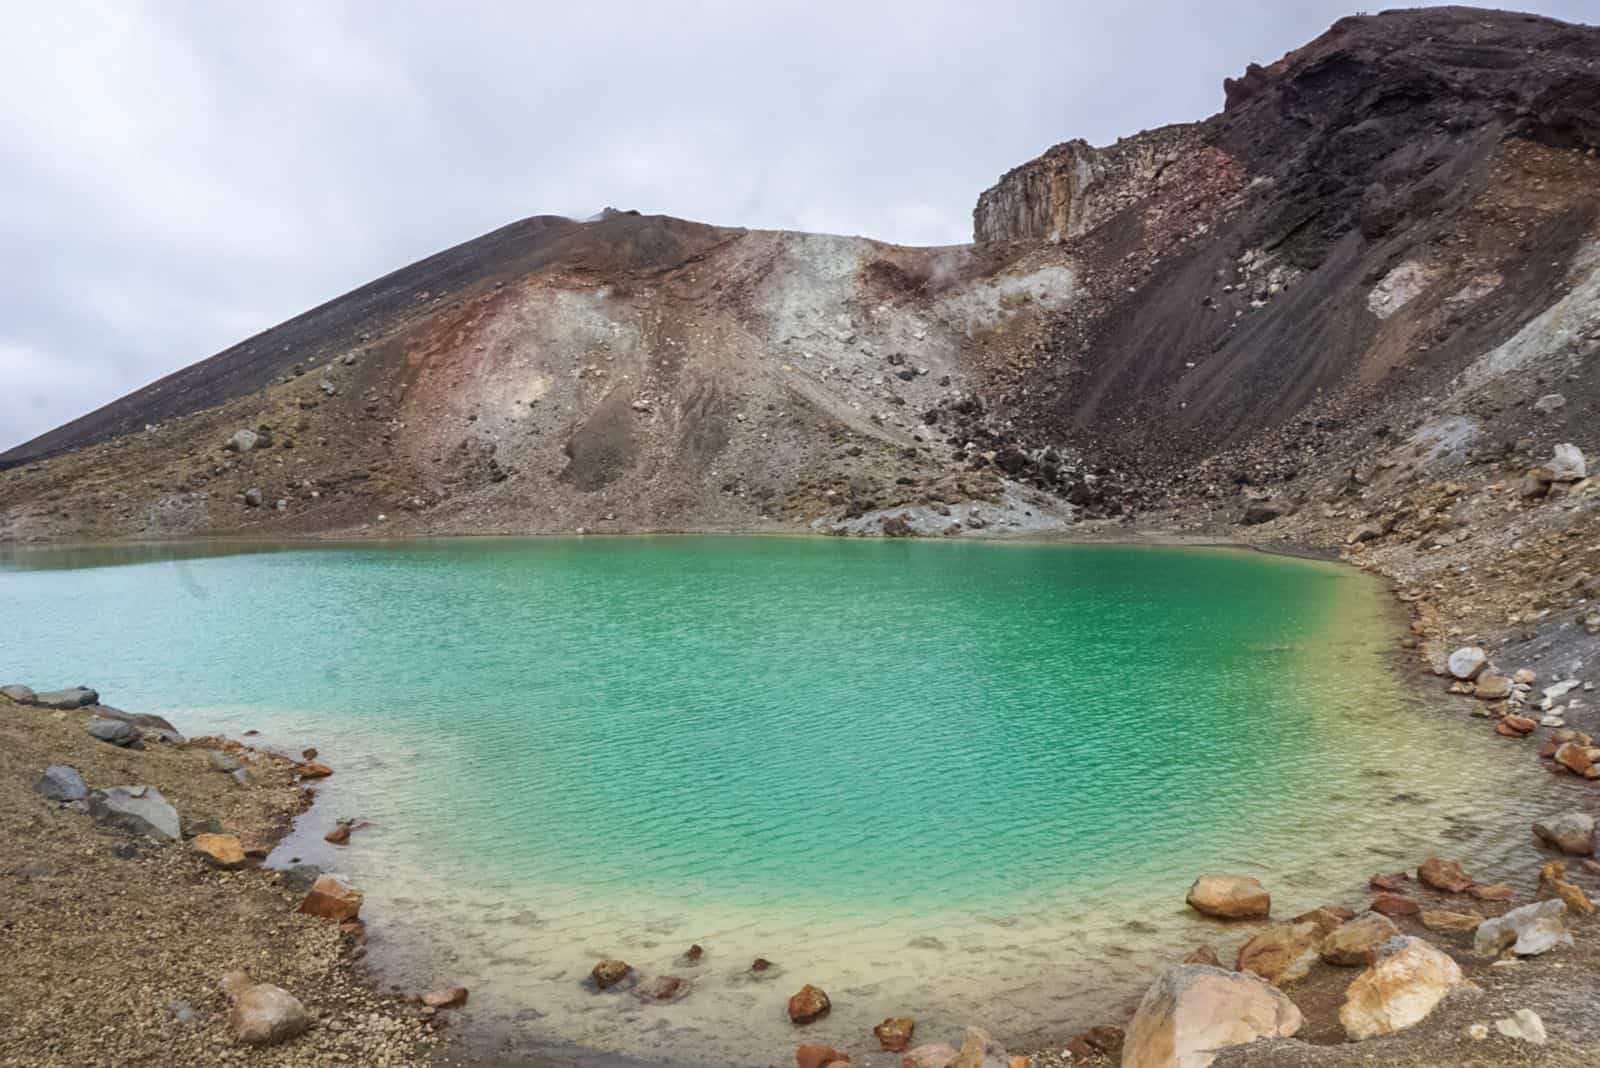 Enjoy every second of the Tongariro Crossing hike